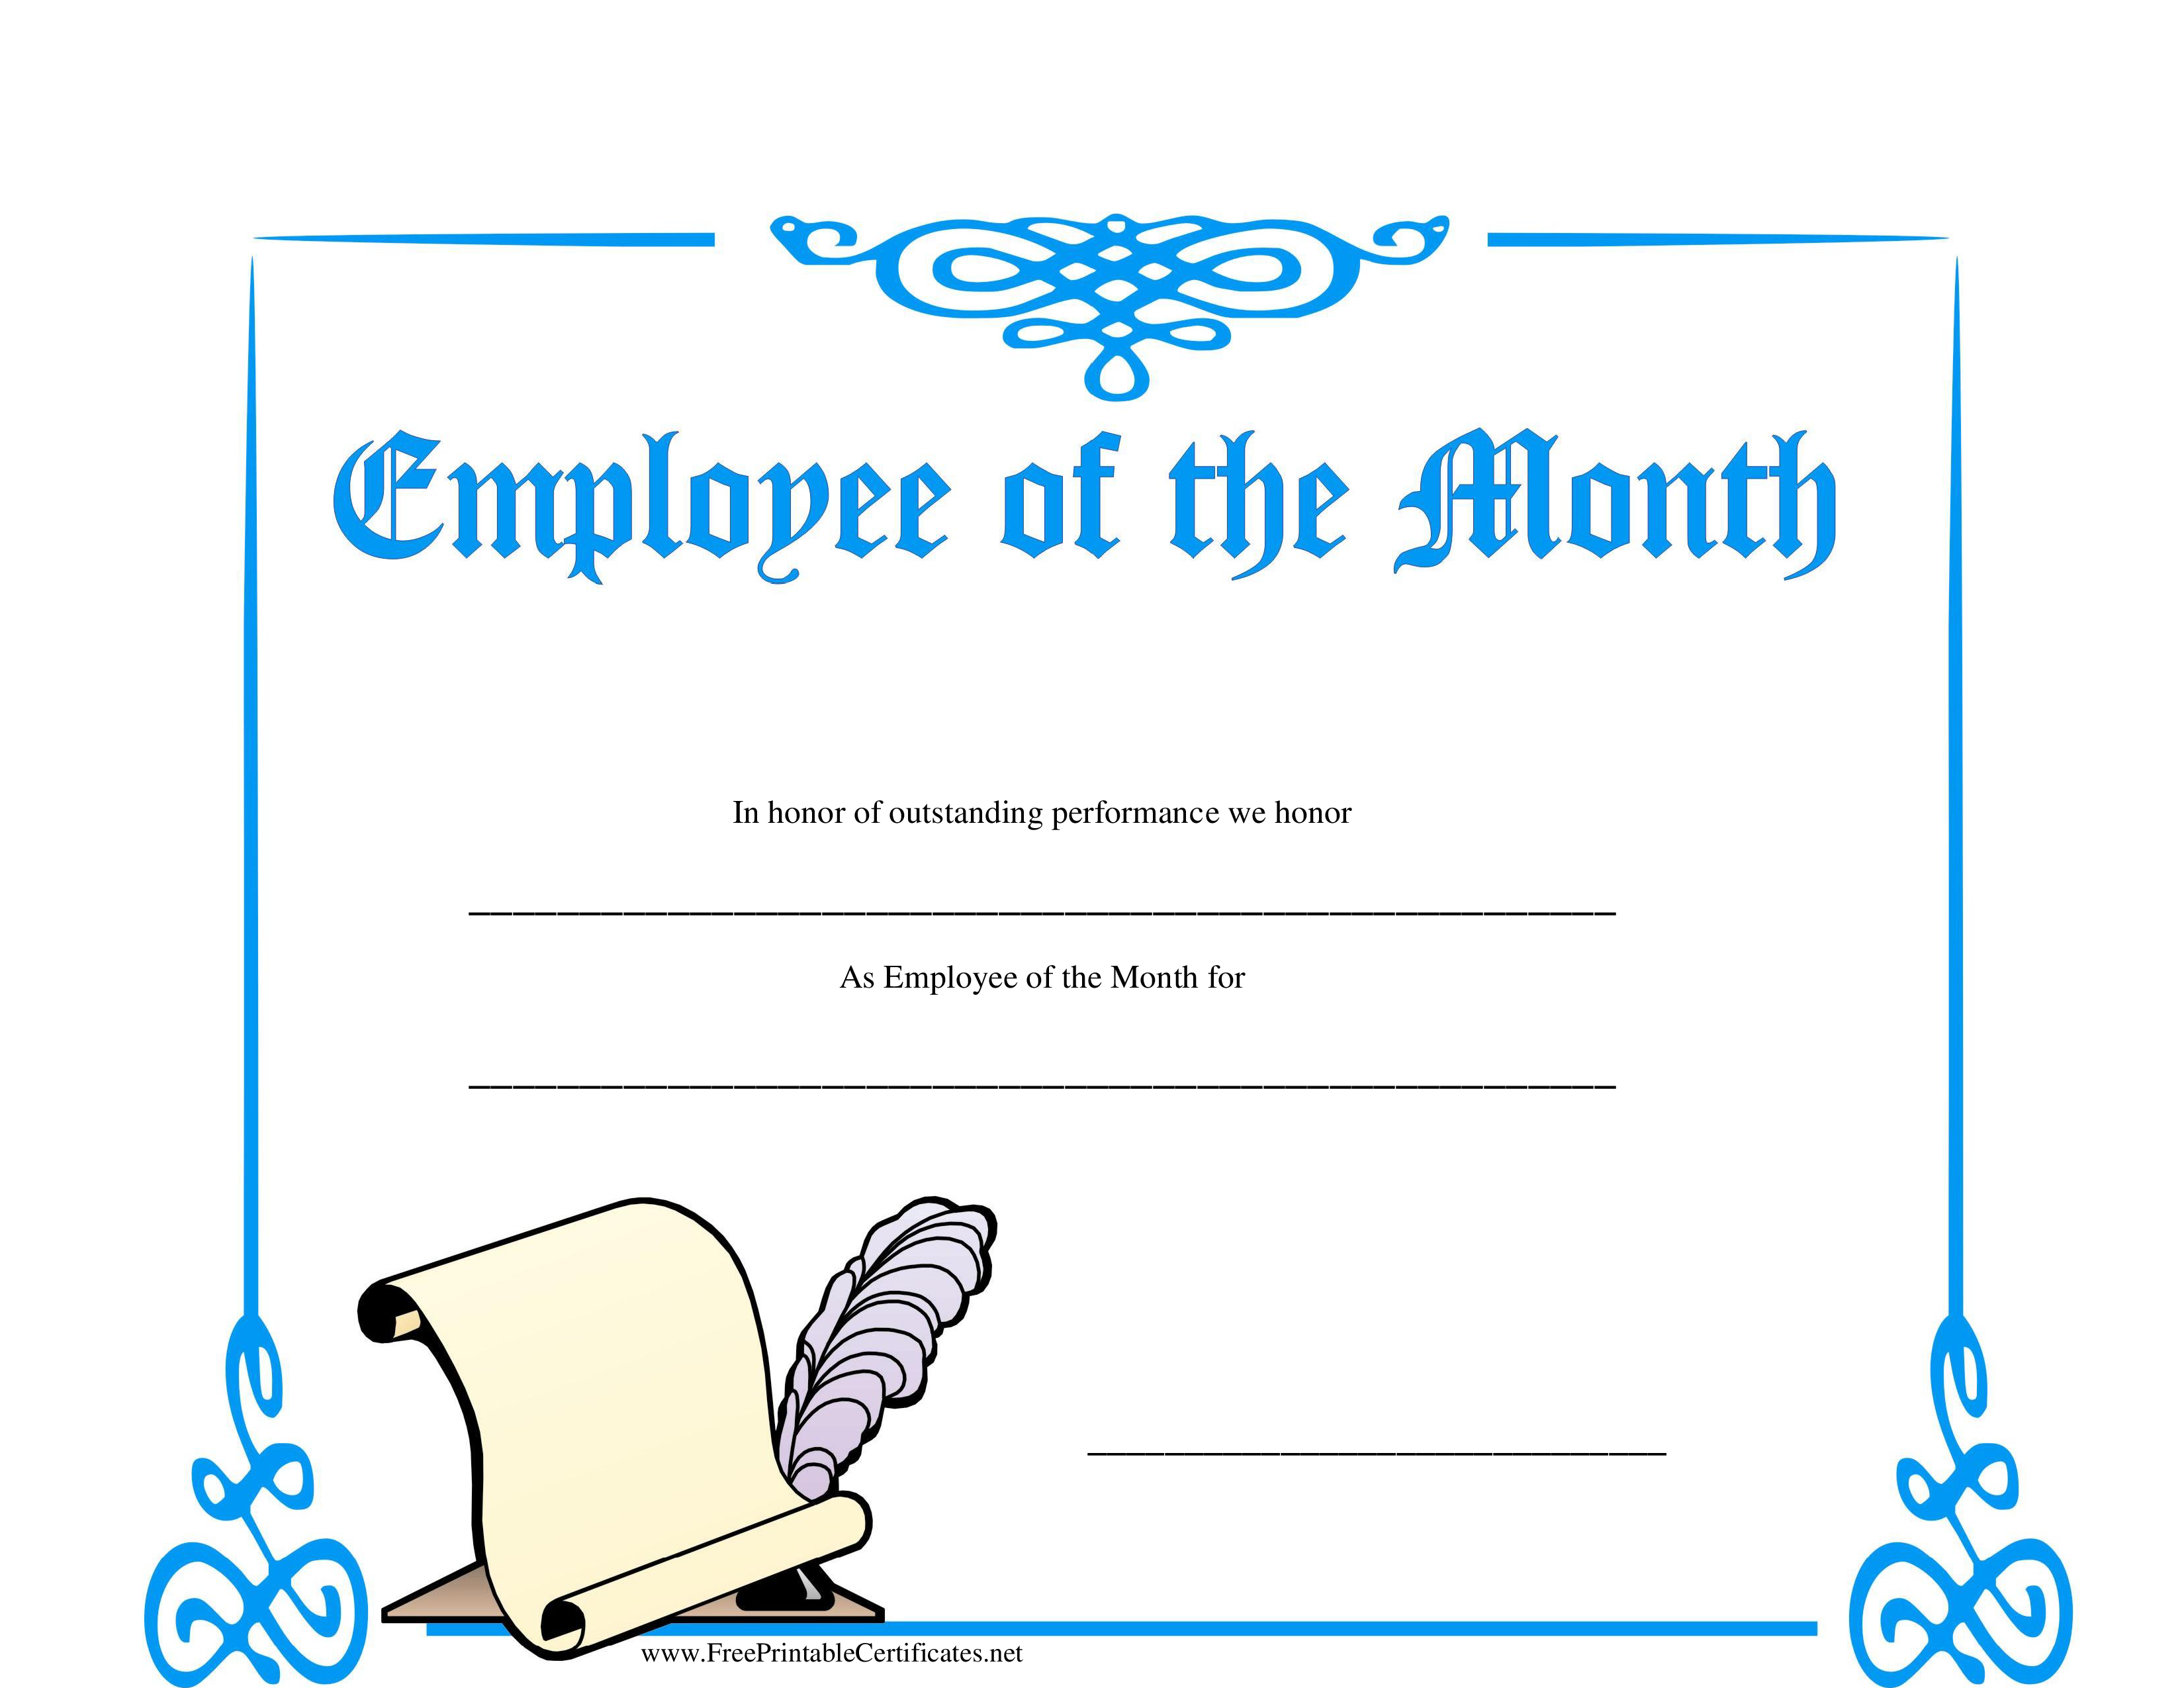 free-printable-downloadable-employee-of-the-month-certificate